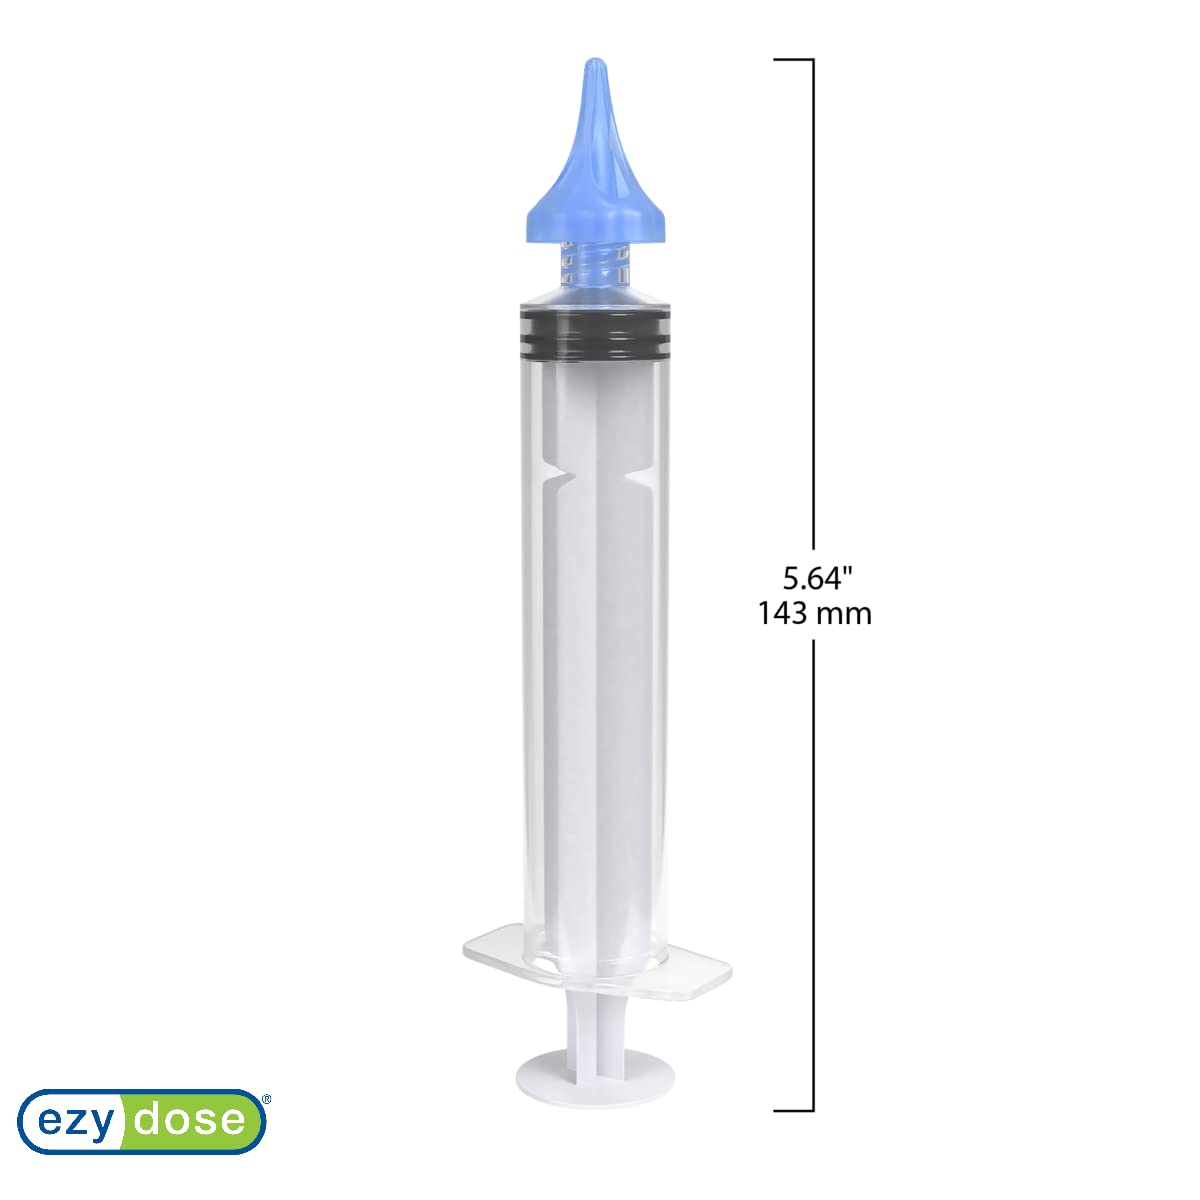 Ezy Dose Ear Wax Removal Syringe with Tri-Stream Tip, Perfect for Kids and Adults, 20mL Capacity